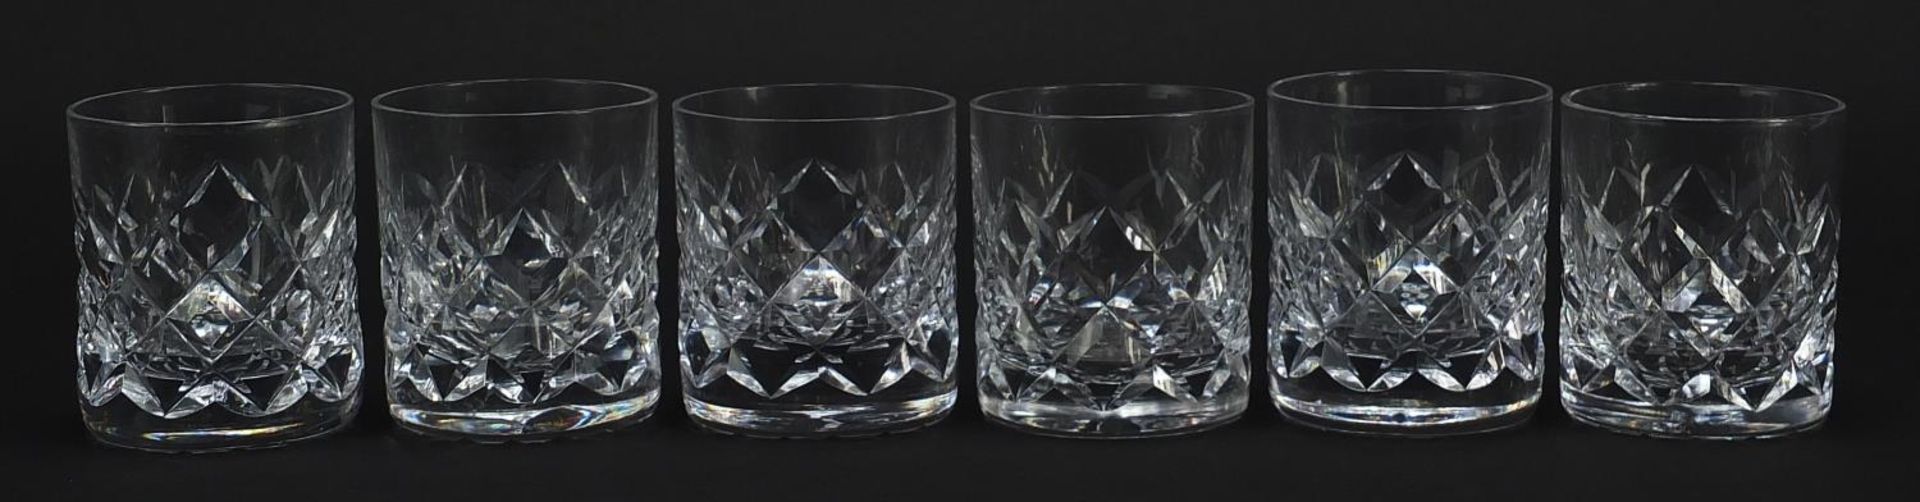 Six lead crystal whiskey tumblers, 8cm high - Image 4 of 6